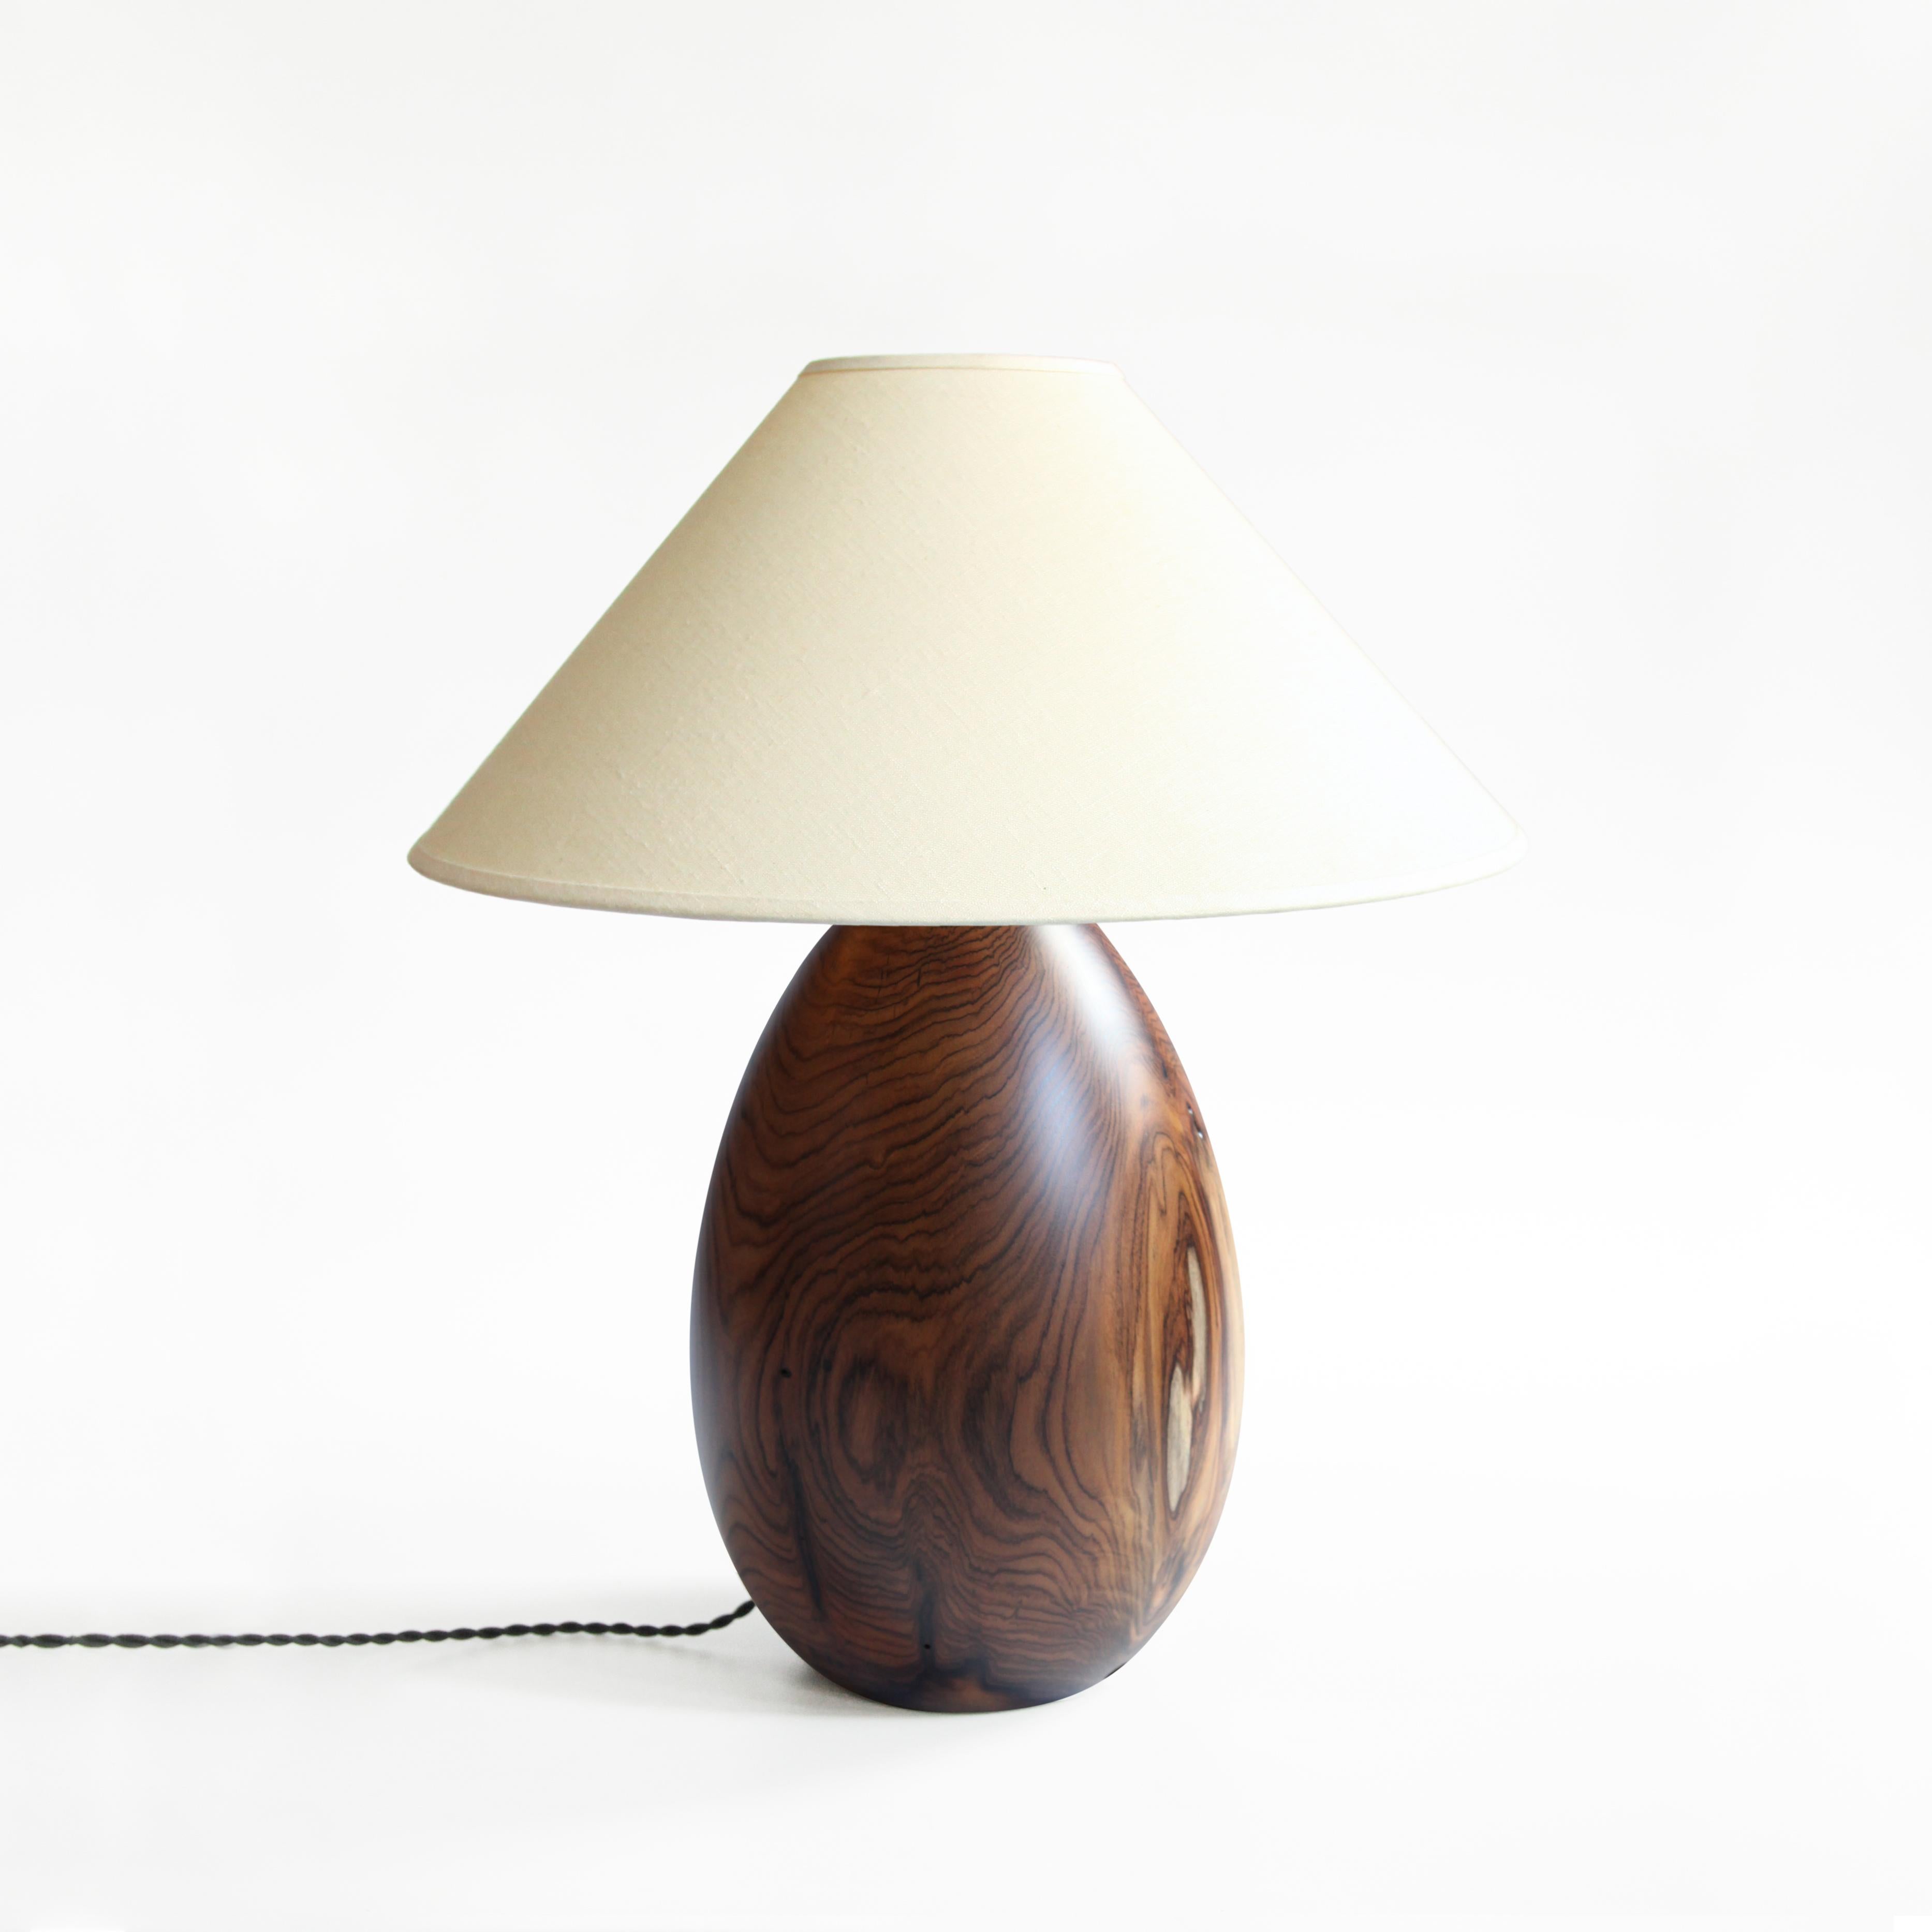 The Árbol collection is an embrace of tropical modernism; each lamp is composed of salvaged tropical hardwoods from the Bolivian city of Santa Cruz, where trees that are felled by natural causes, or for construction are rescued by our team. A blend